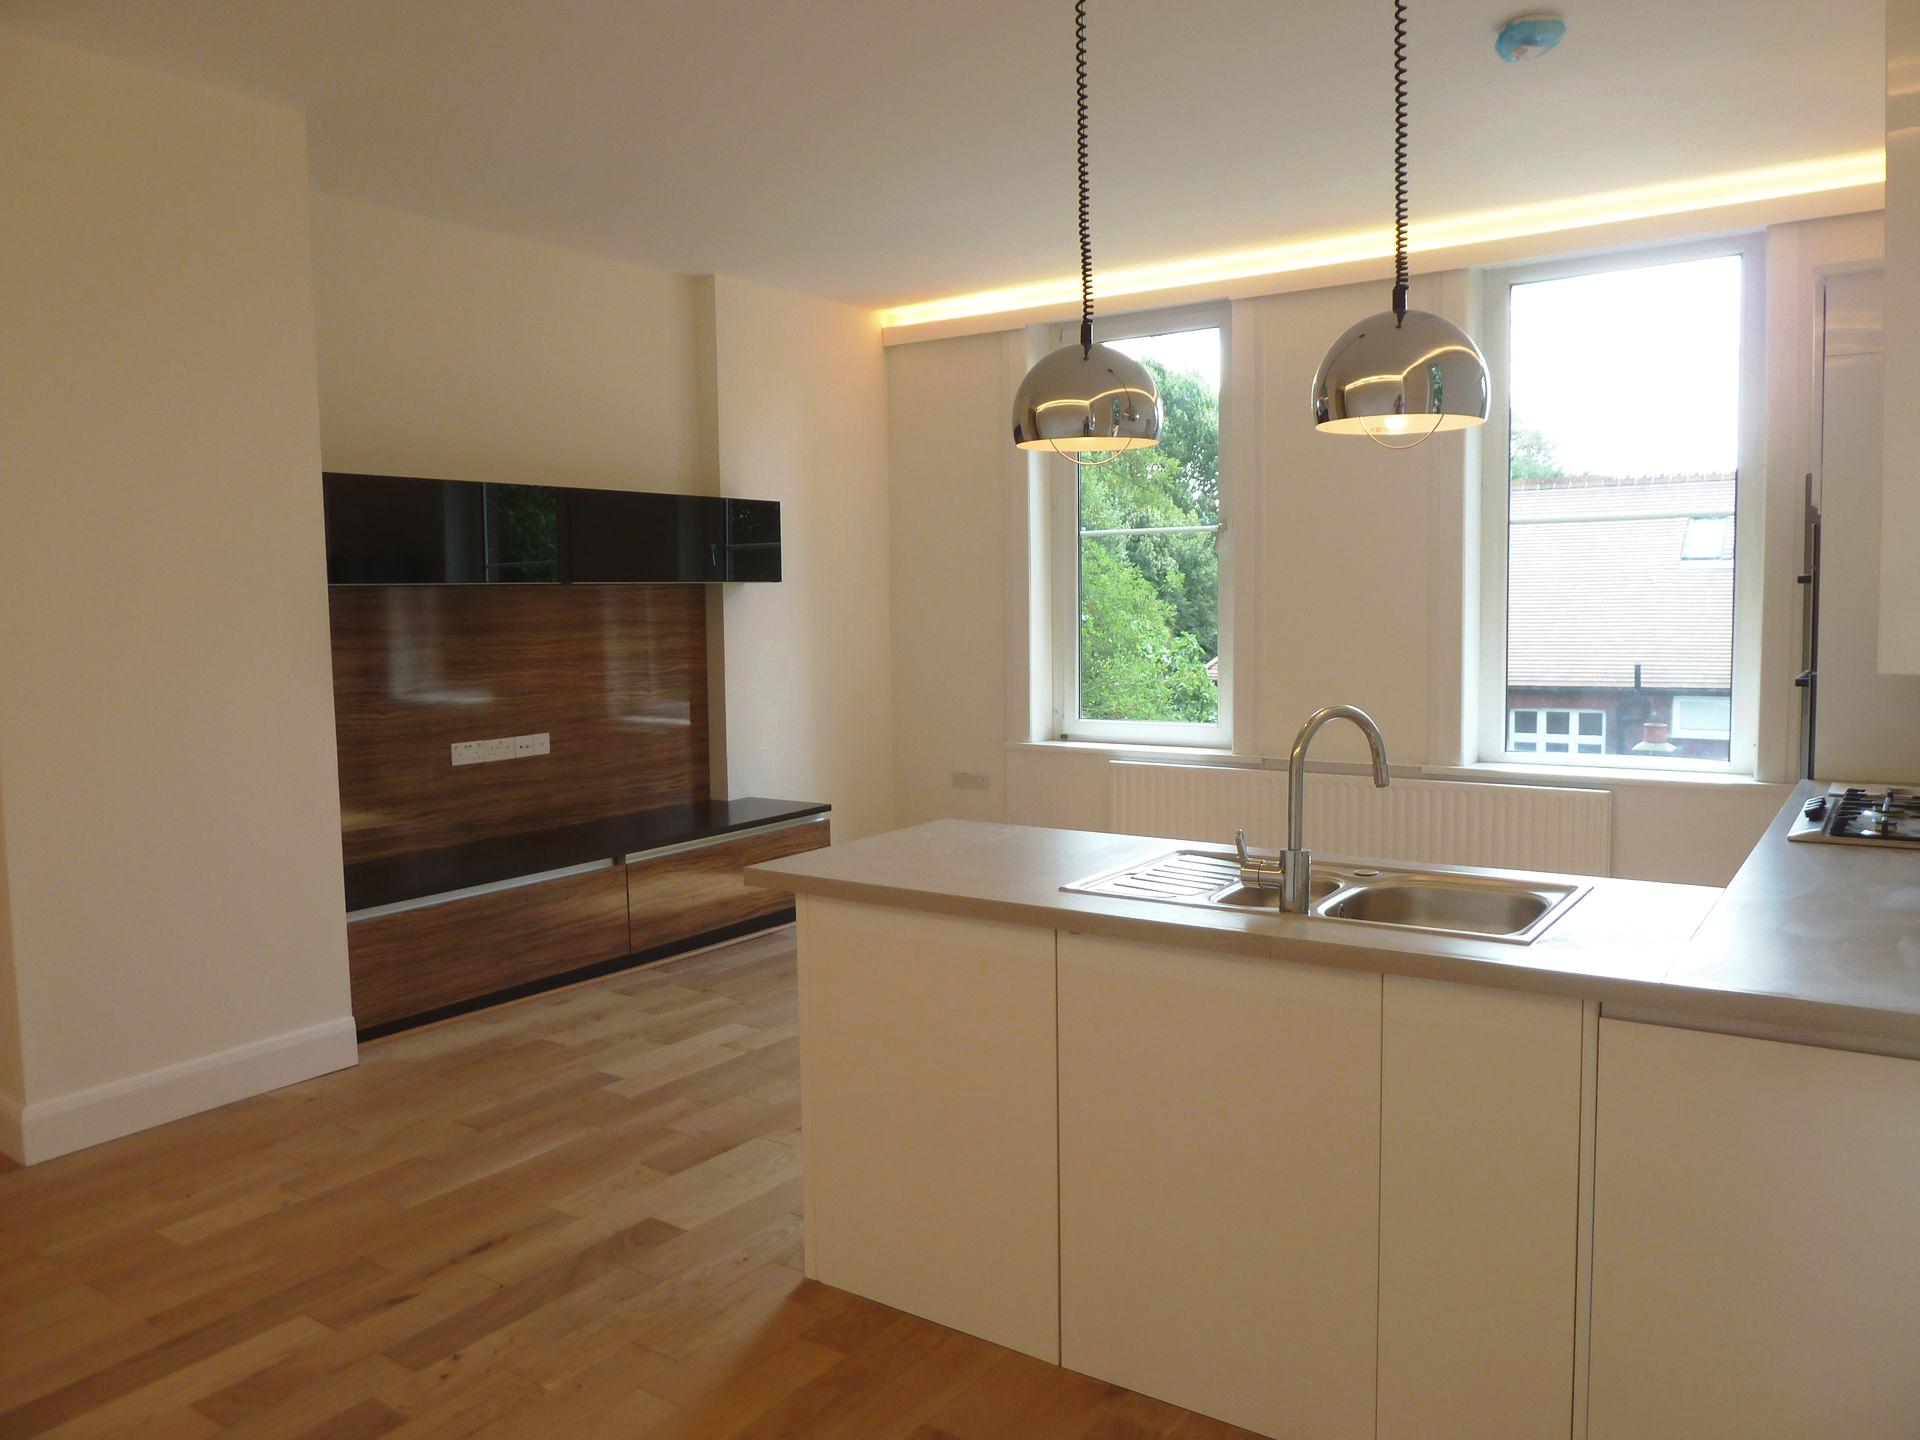 2 Bedroom Flat to rent in Hampstead, London, NW3